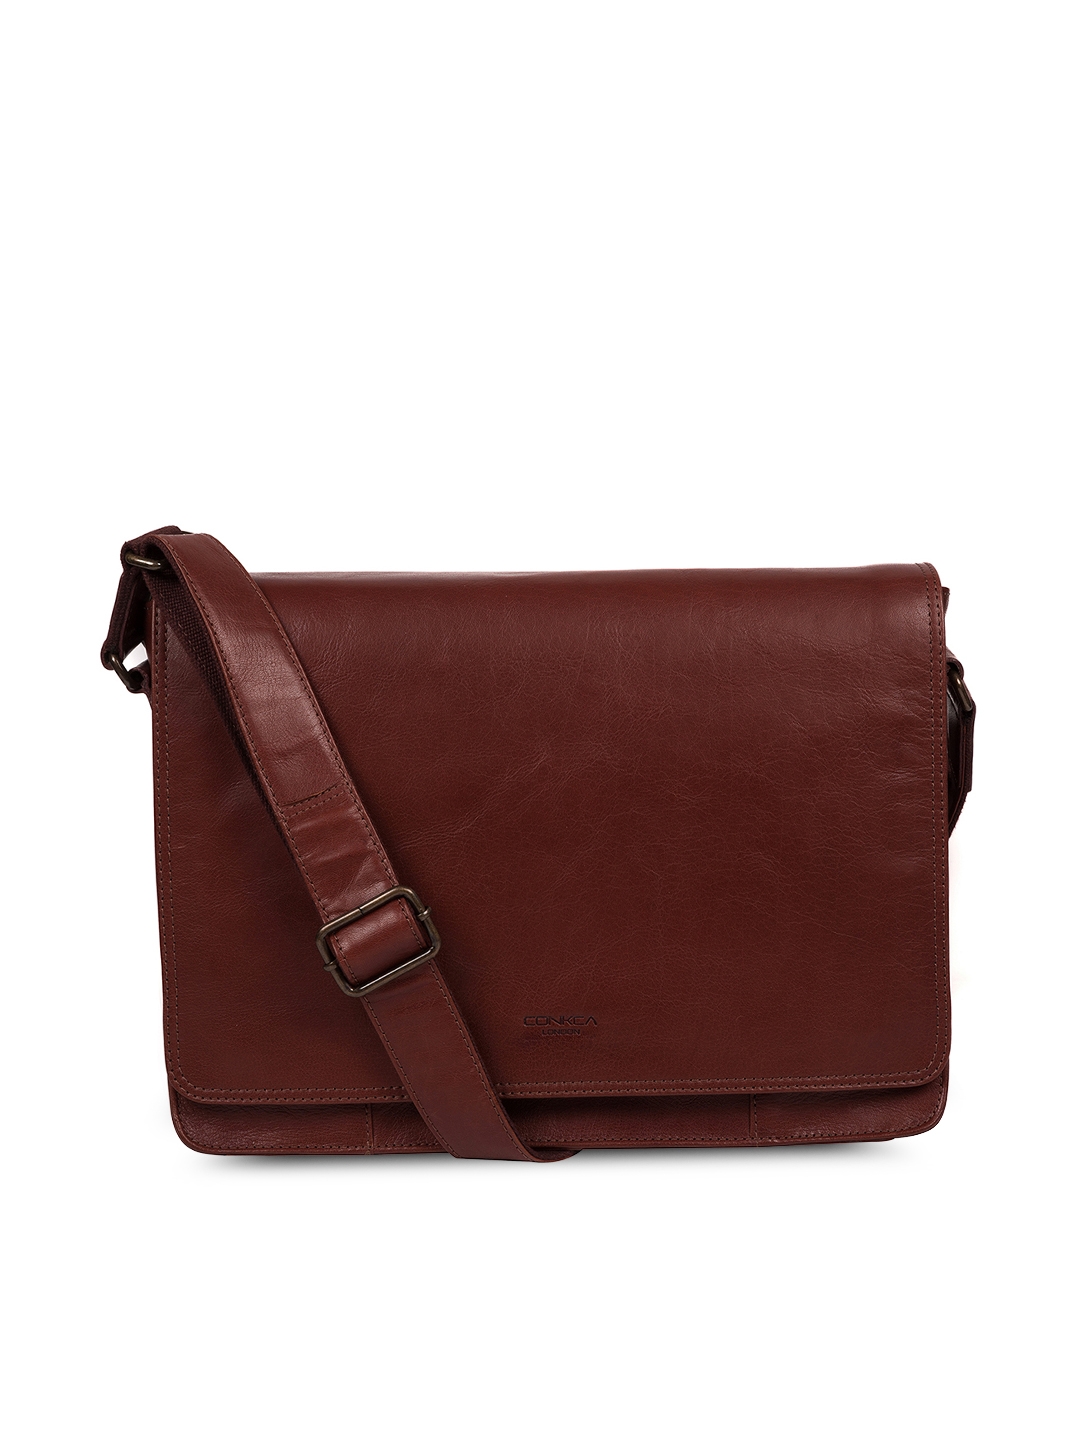 Men's Leather Bags - Pure Luxuries London